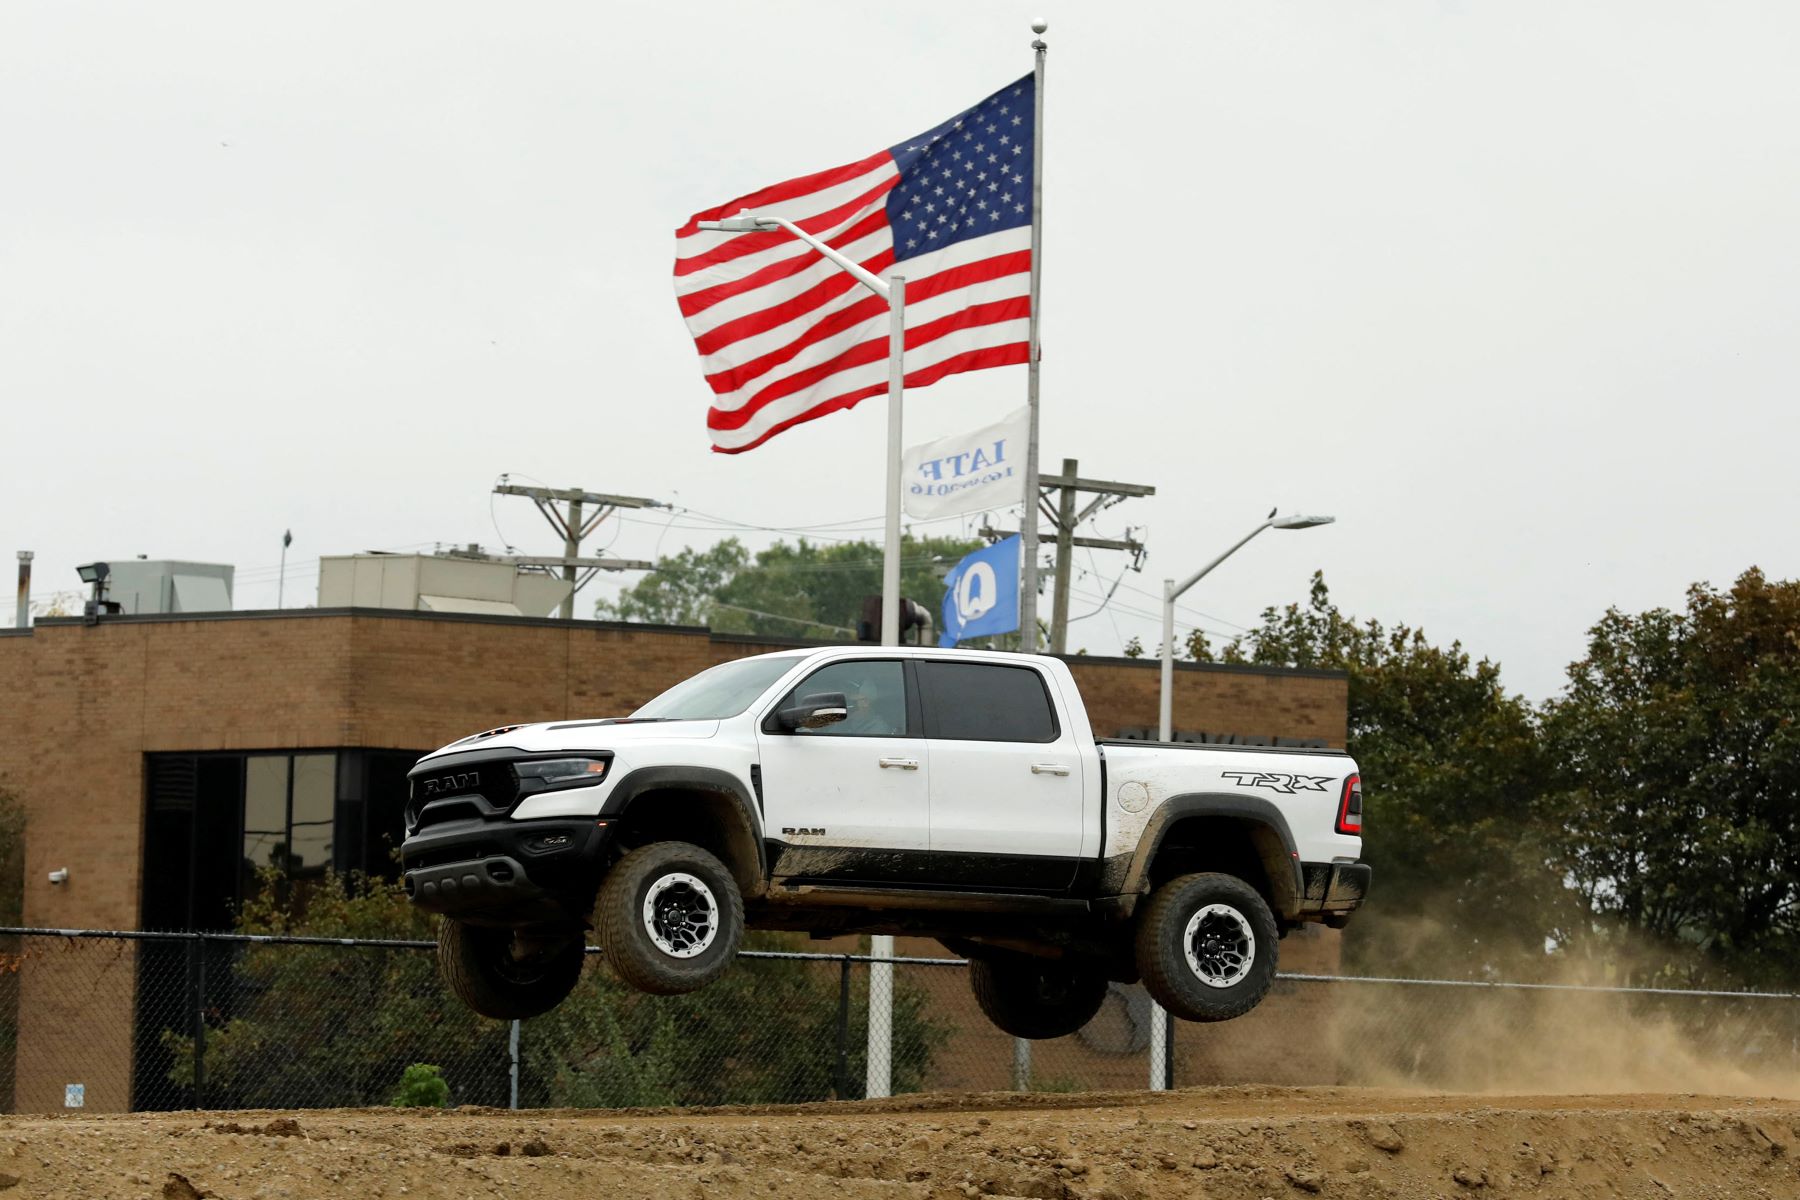 Ram 1500 TRX off-road performance truck performing on a test track during the Motor Bella event in Pontiac, Michigan